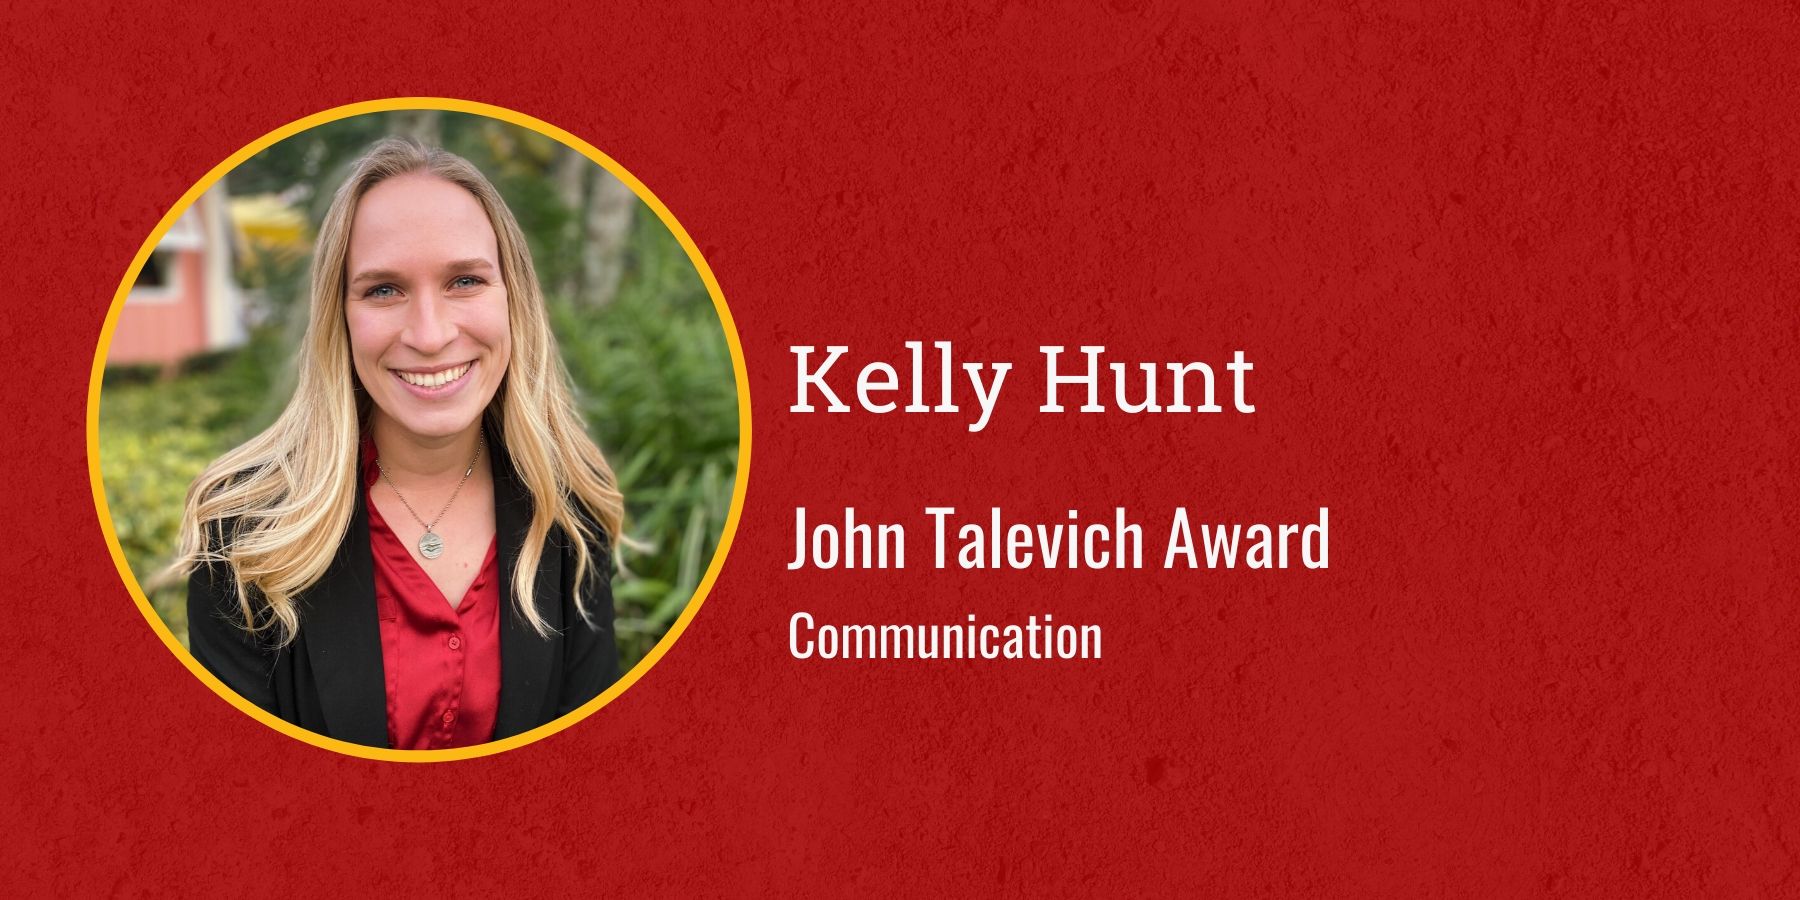 Photo of Kelly Hunt with text John Talevich Award, Communication